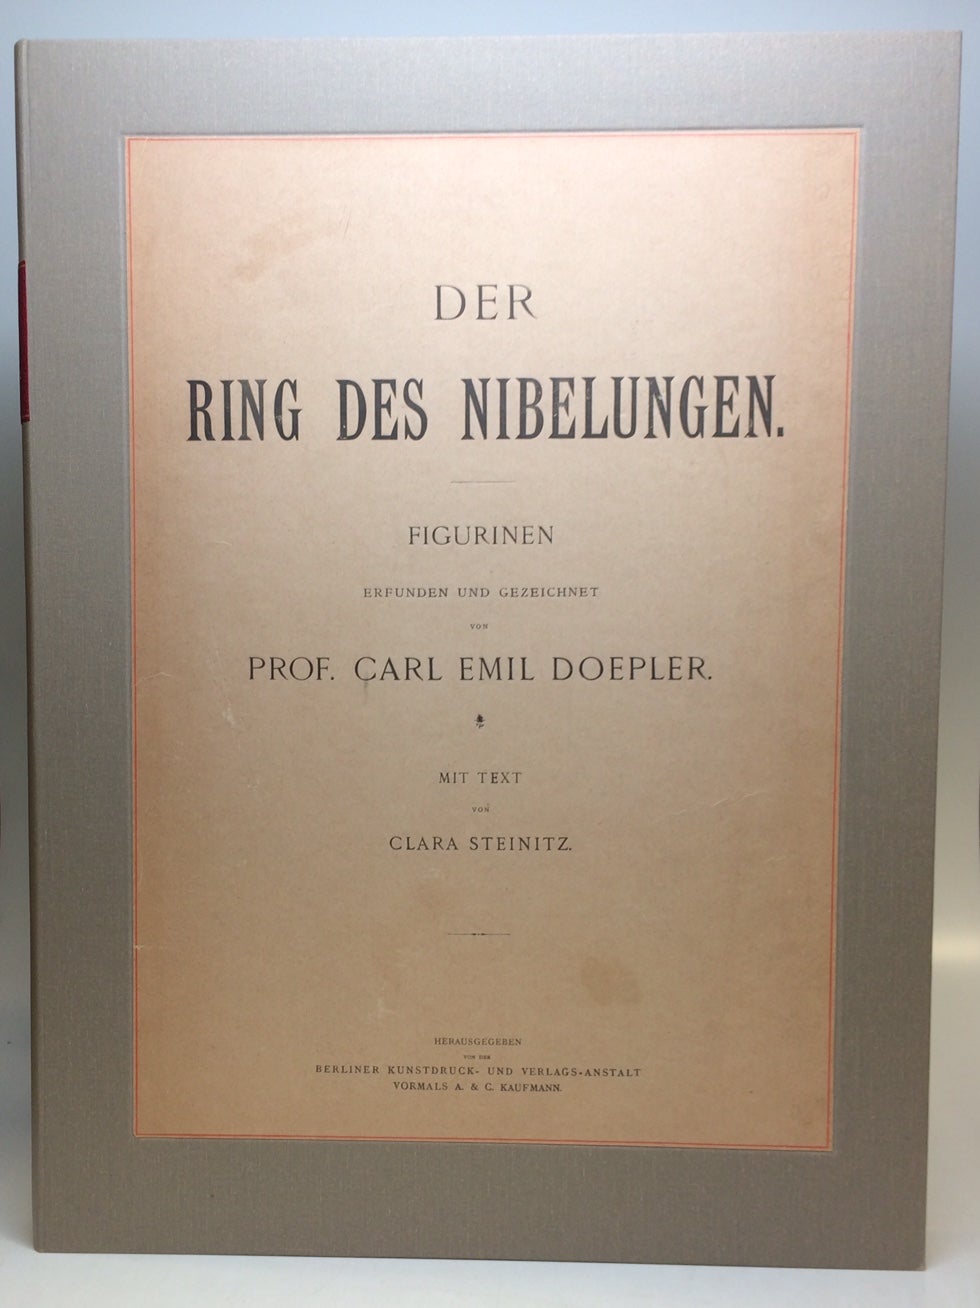 At The Opera, Richard Wagner's The Ring of the Nibelung Part 3 